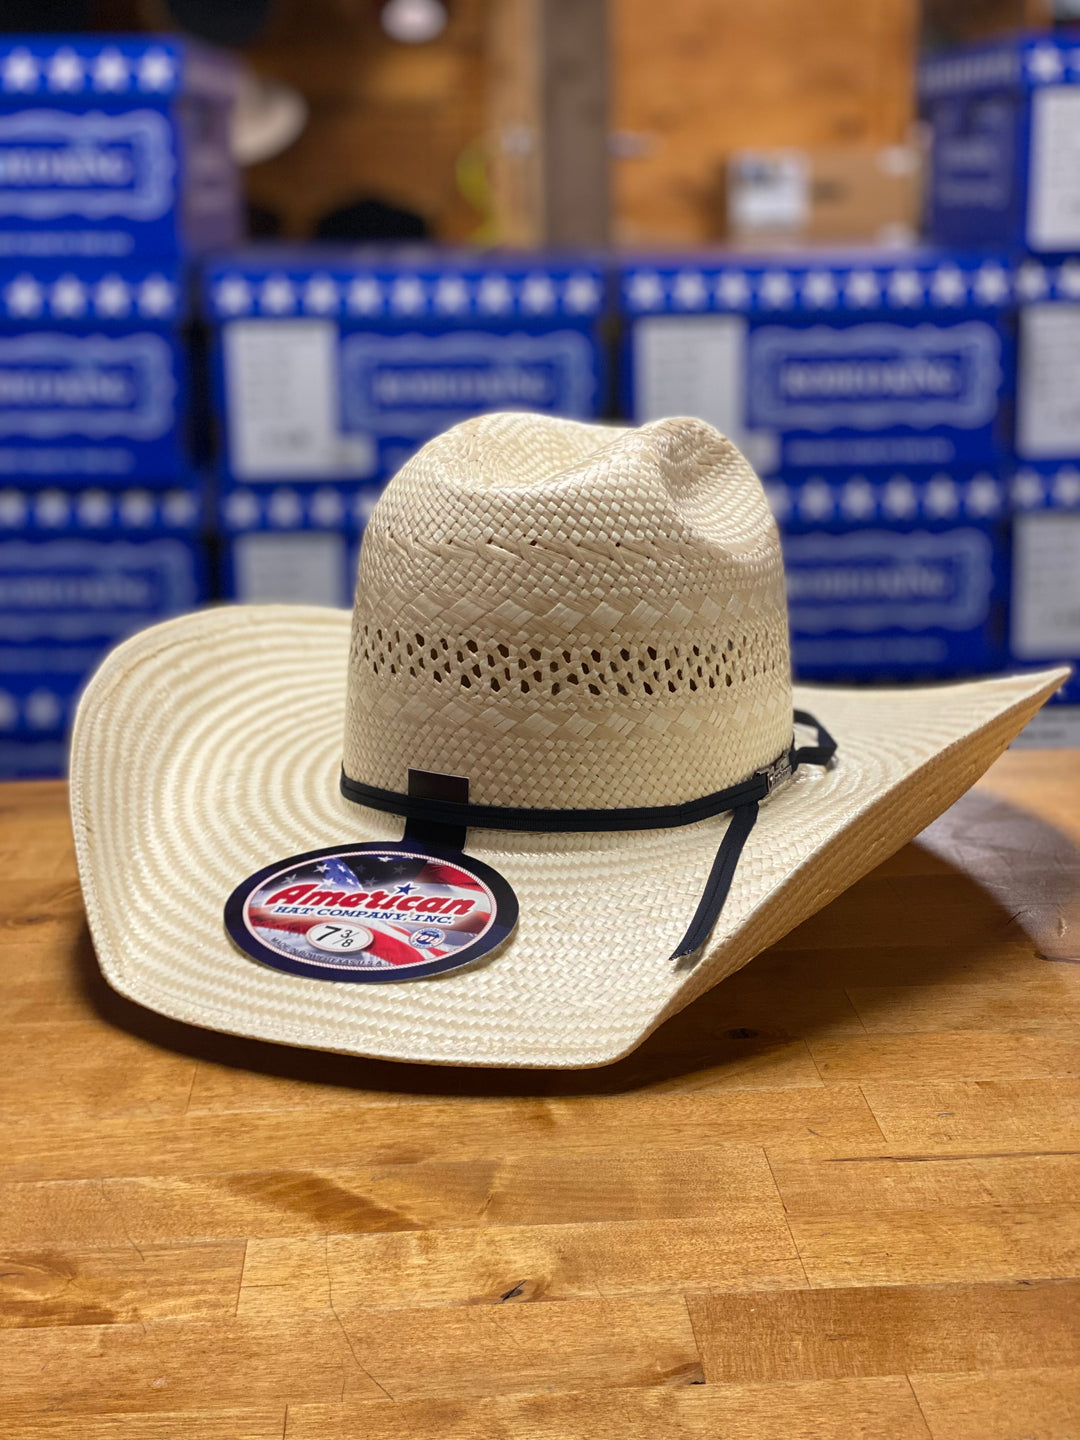 American Hat Co. | 845 Poli Rope 4 1/2" Straw | Navy Cord